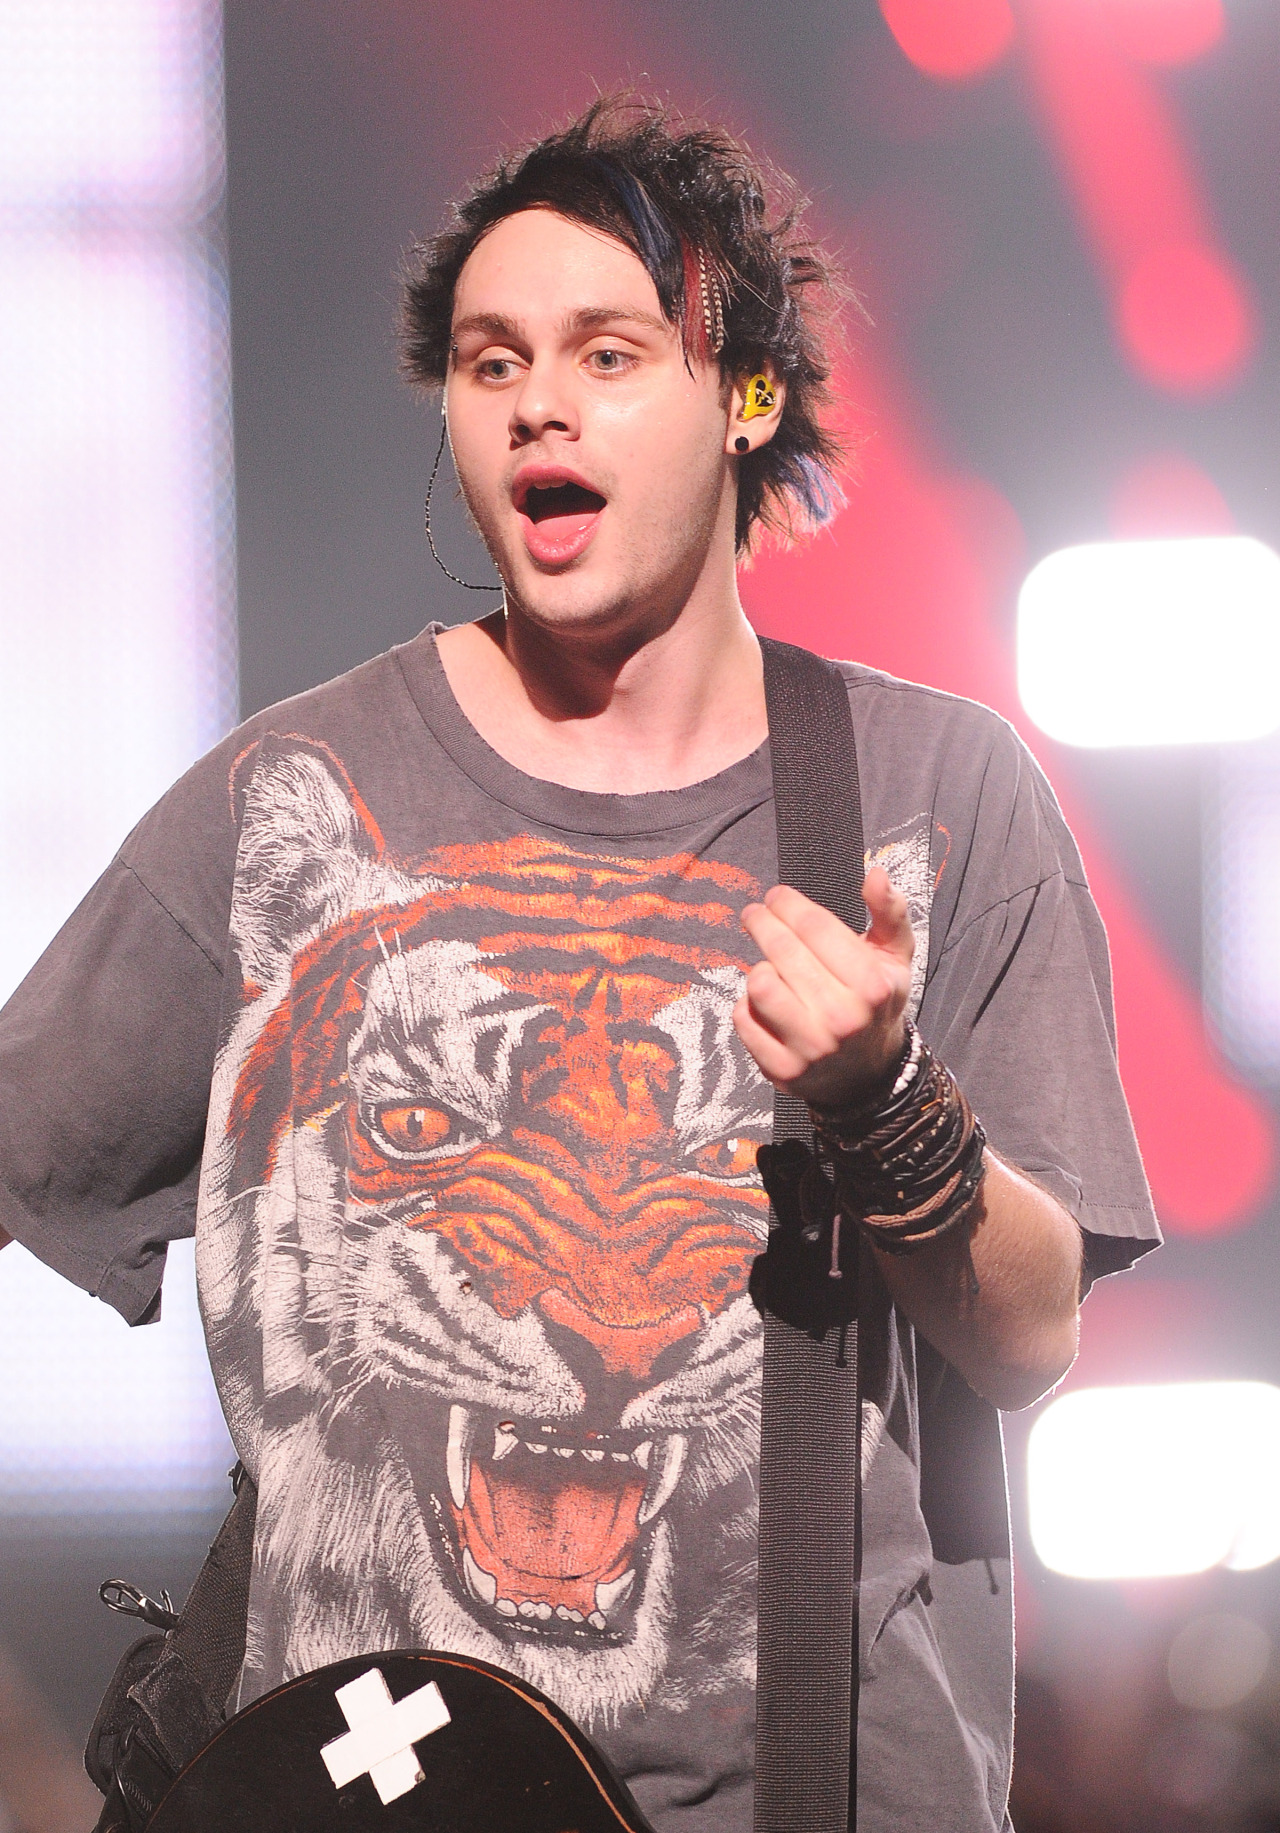 Michael Clifford Images Vevo Certified Live Hd Wallpaper - Rock Concert , HD Wallpaper & Backgrounds